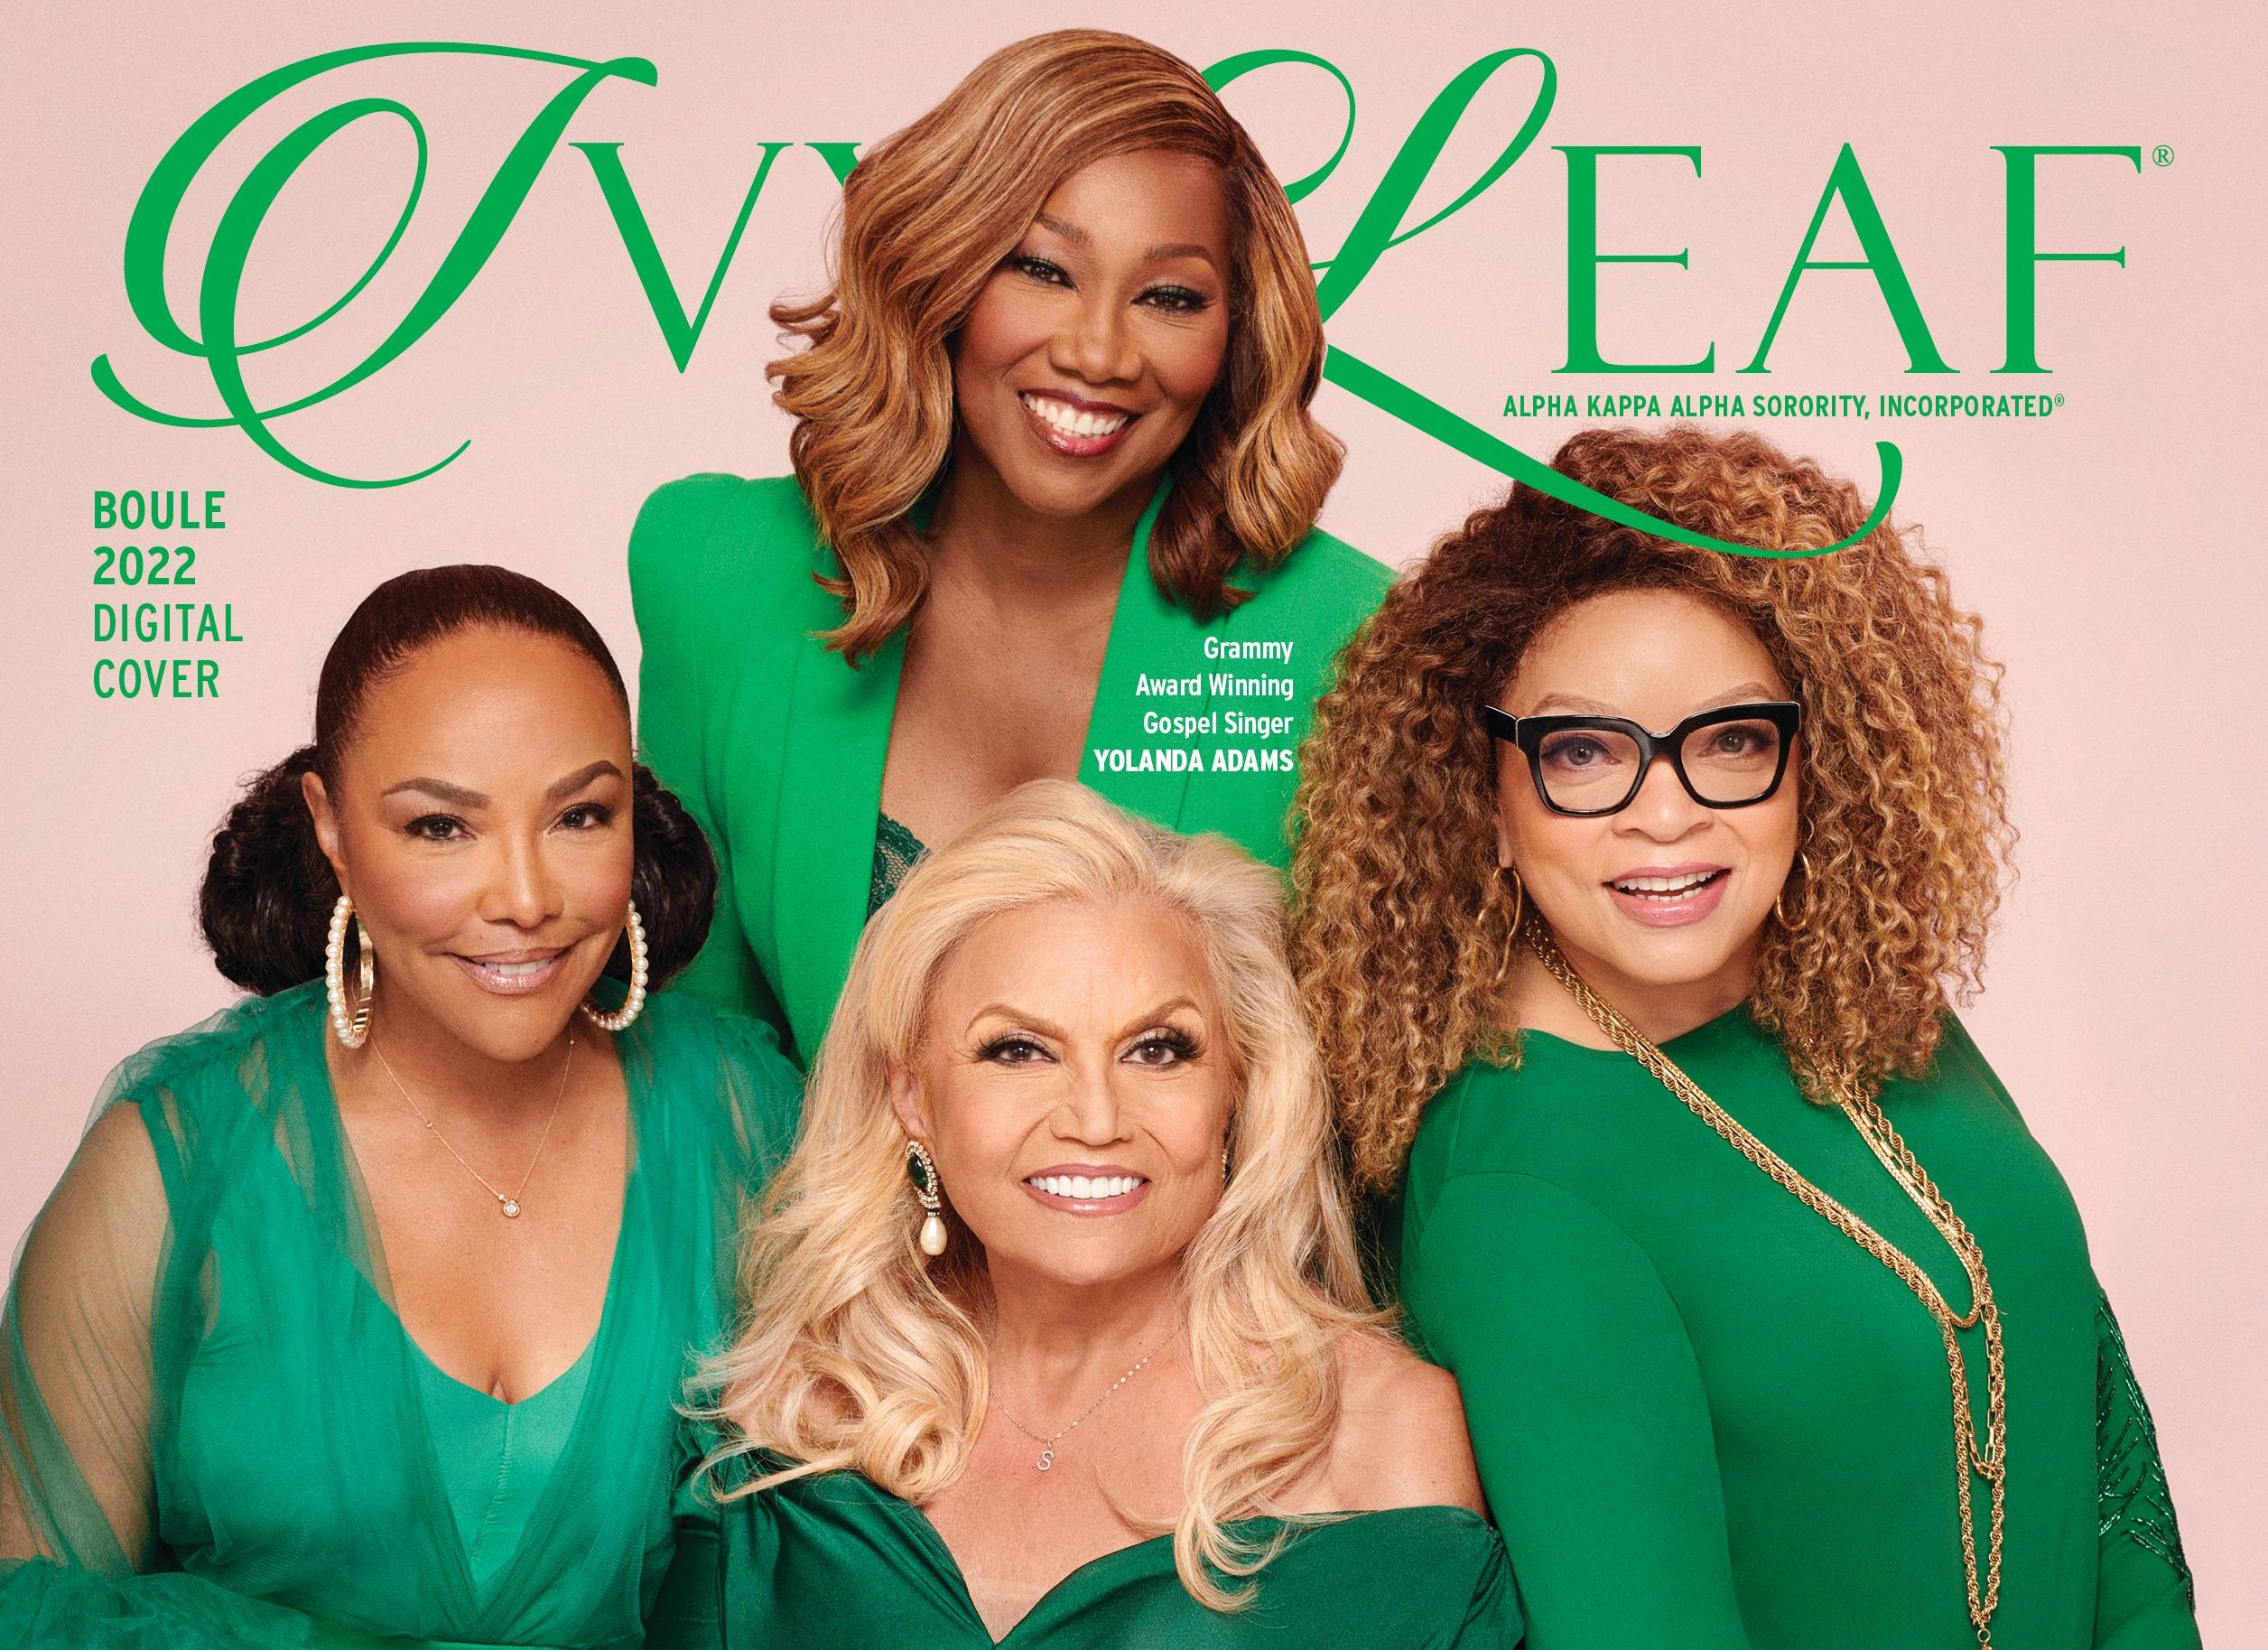 Alpha Kappa Alpha Sorority, Inc. Launches Special Double Magazine Cover Featuring Honorary Members